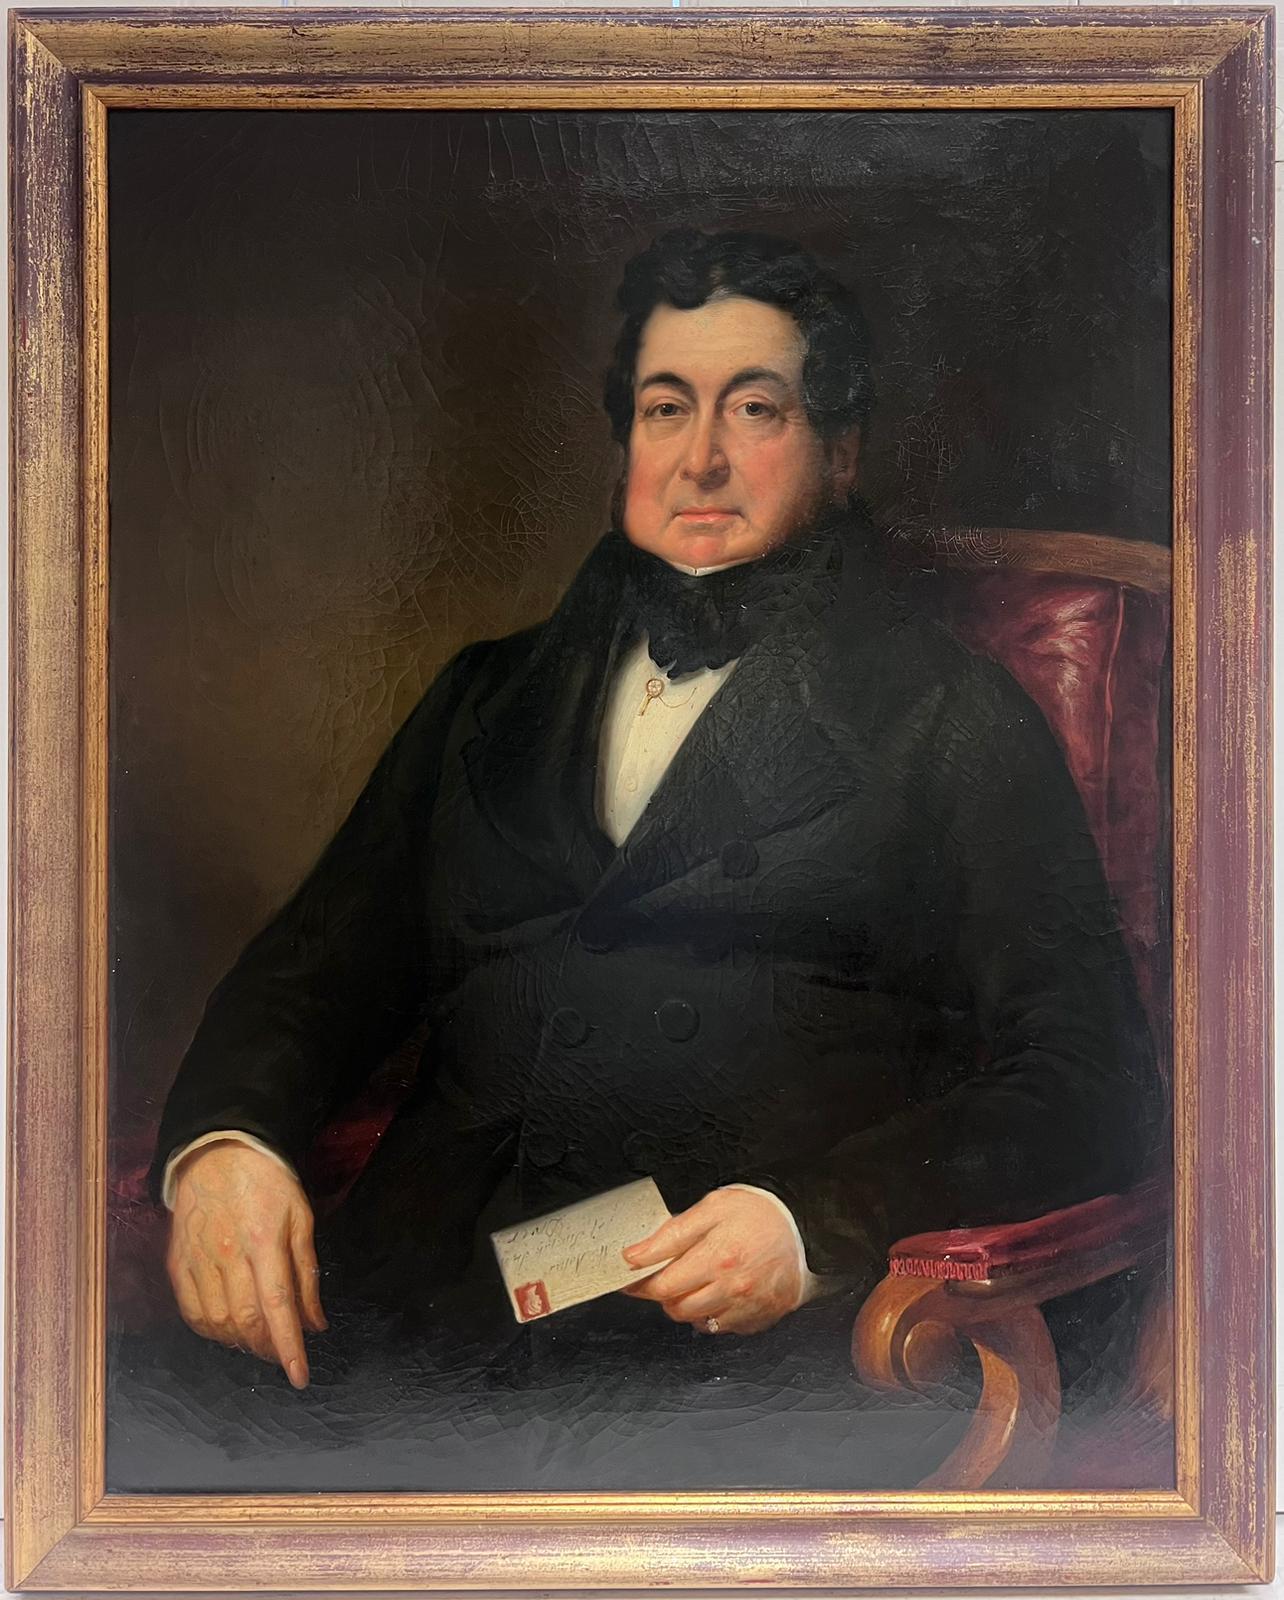 Victorian English Portrait Painting - Very Large Mid 19th Century Victorian Portrait English Gentleman Seated Leather